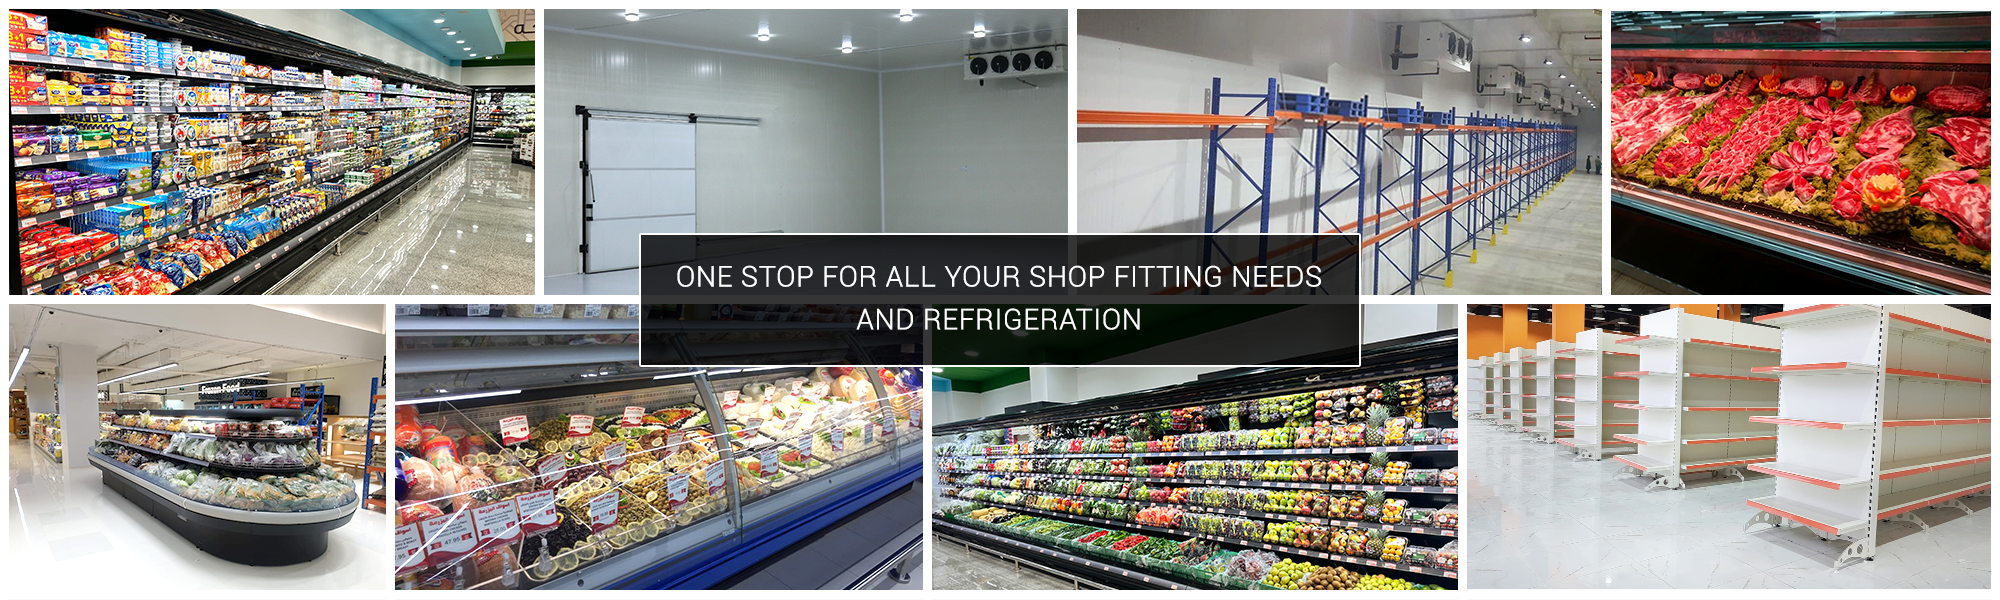 one stop for all your shop fitting need and Refrigeration, Supermarket Equipment, Cold rooms, Refrigeration cabinets, Compressors, Evaporator, condenser